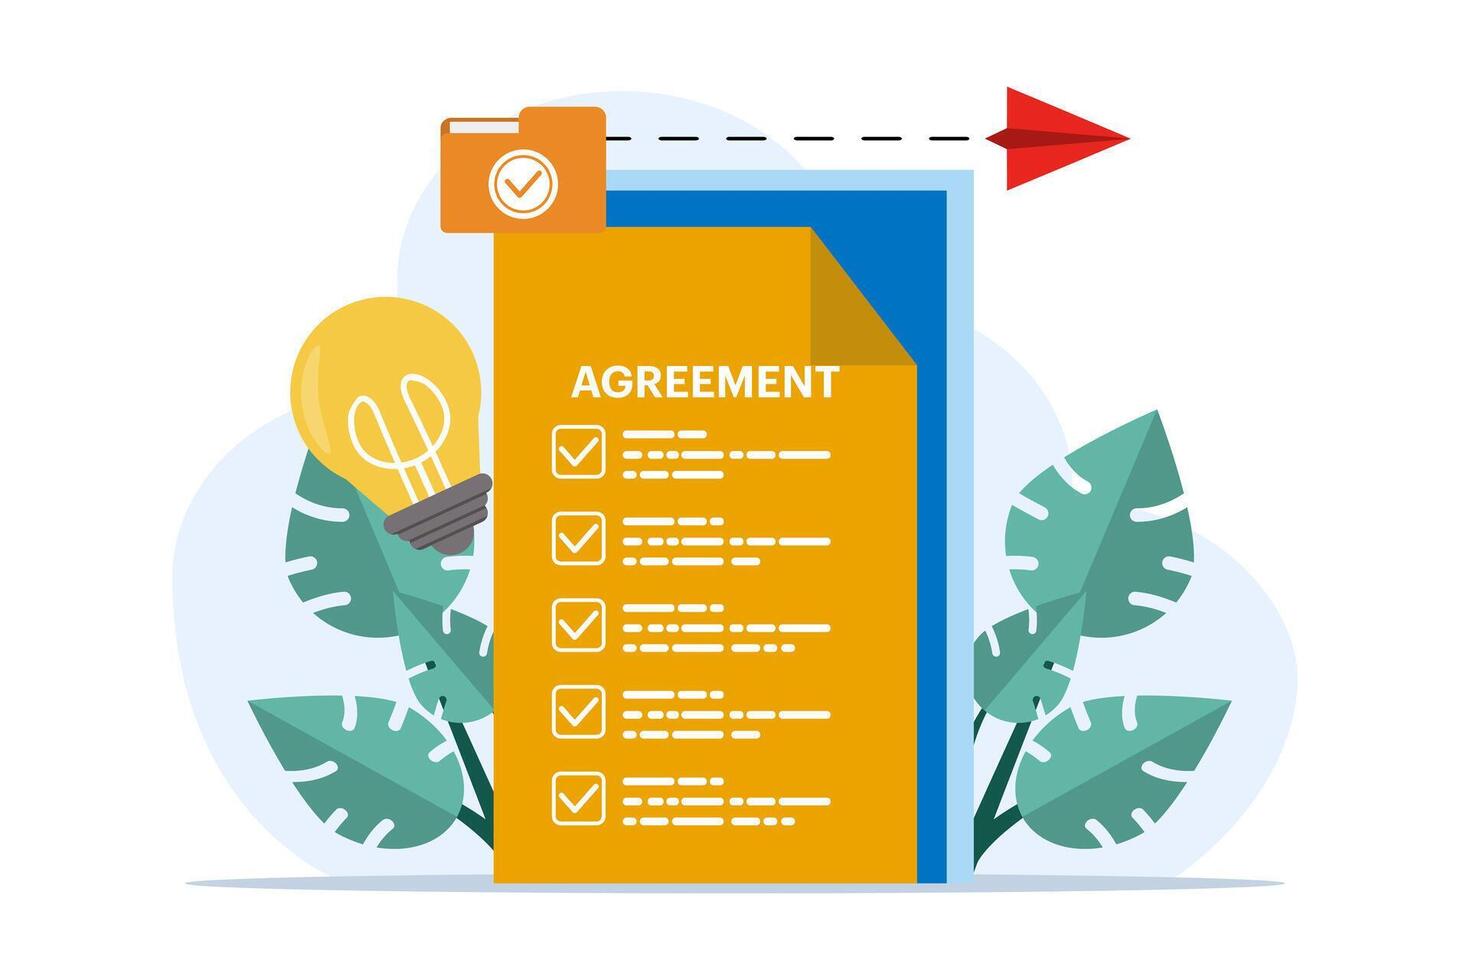 agreement concept, collaboration business, contract entrepreneur, business deal, collaboration agreement or document, successful contract or negotiation, start-up, flat vector illustration.